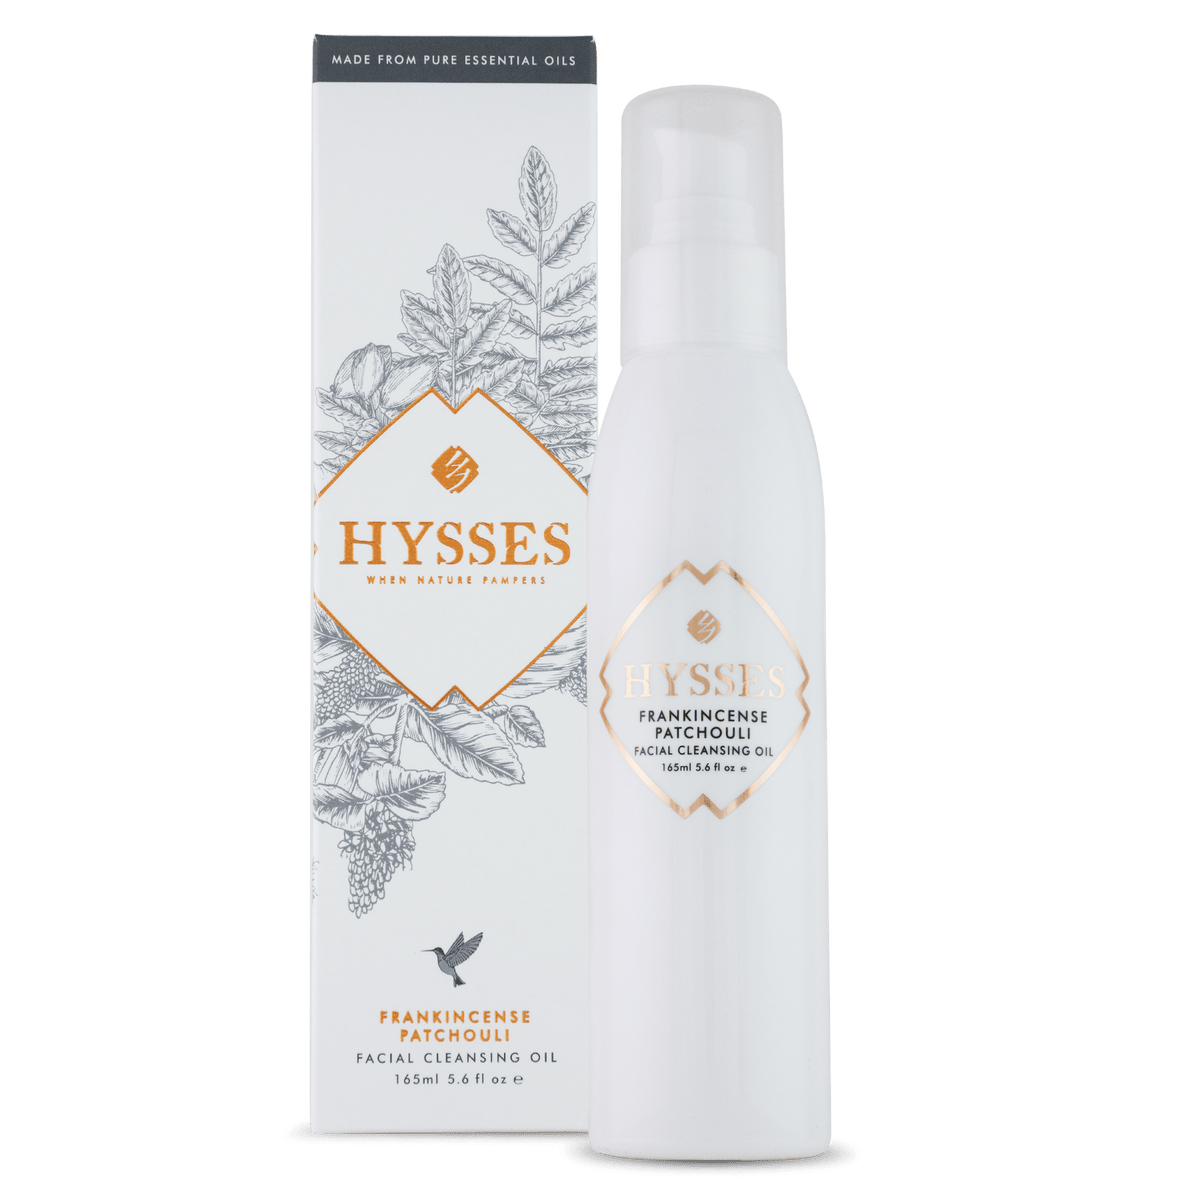 Hysses Face Care Facial Cleansing Oil Frankincense Patchouli, 165ml